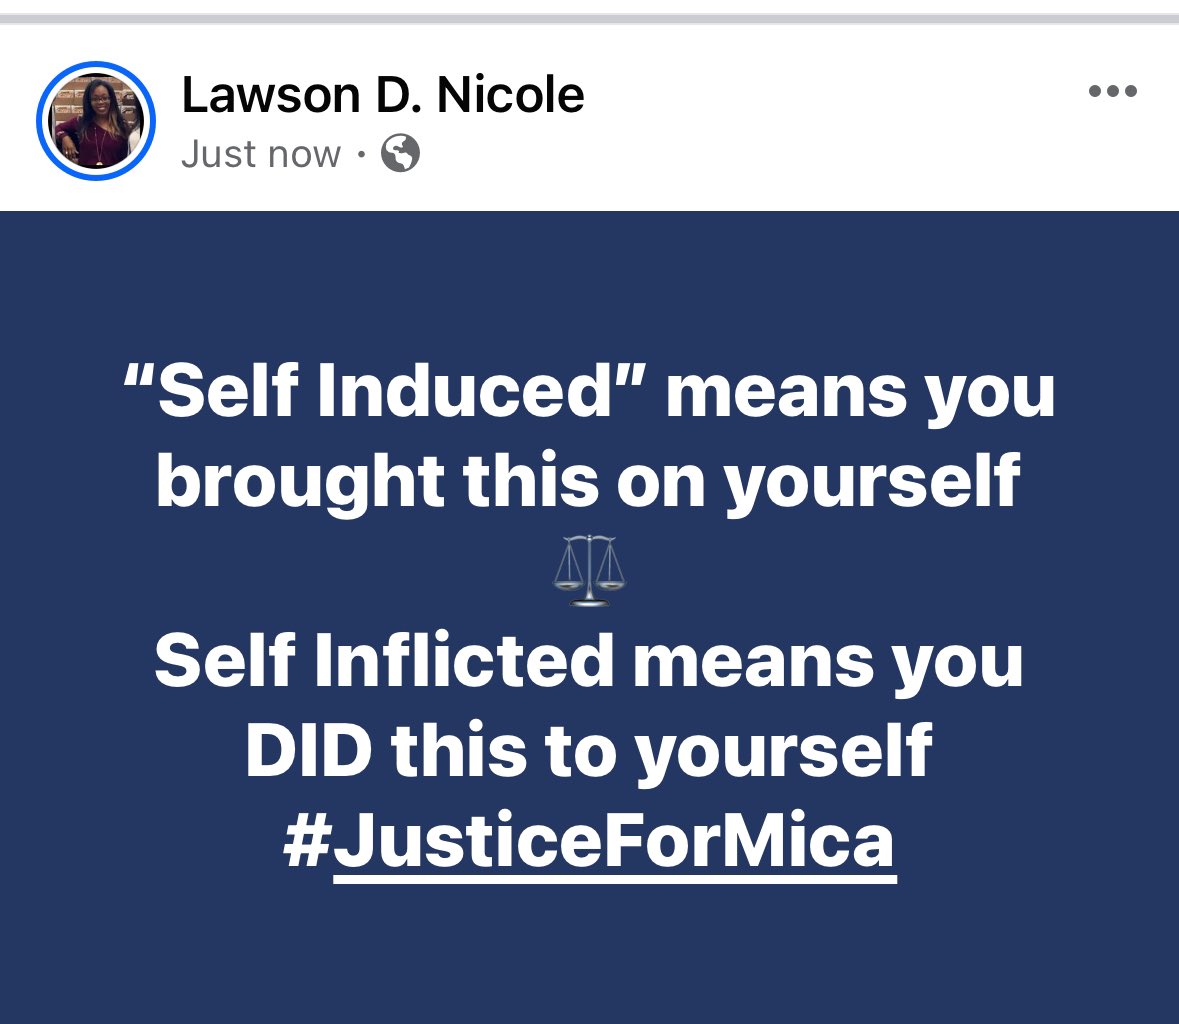 “Self Induced” means you brought this on yourself
⚖️
Self Inflicted means you DID this to yourself
•
•
•
#JusticeForMica #justiceformicamiller #grooming #coercivecontrol #dv #imbalanceofpower #agegap #narcissisticabuse #pimpsinthepulpit #wolvesinsheepsclothing